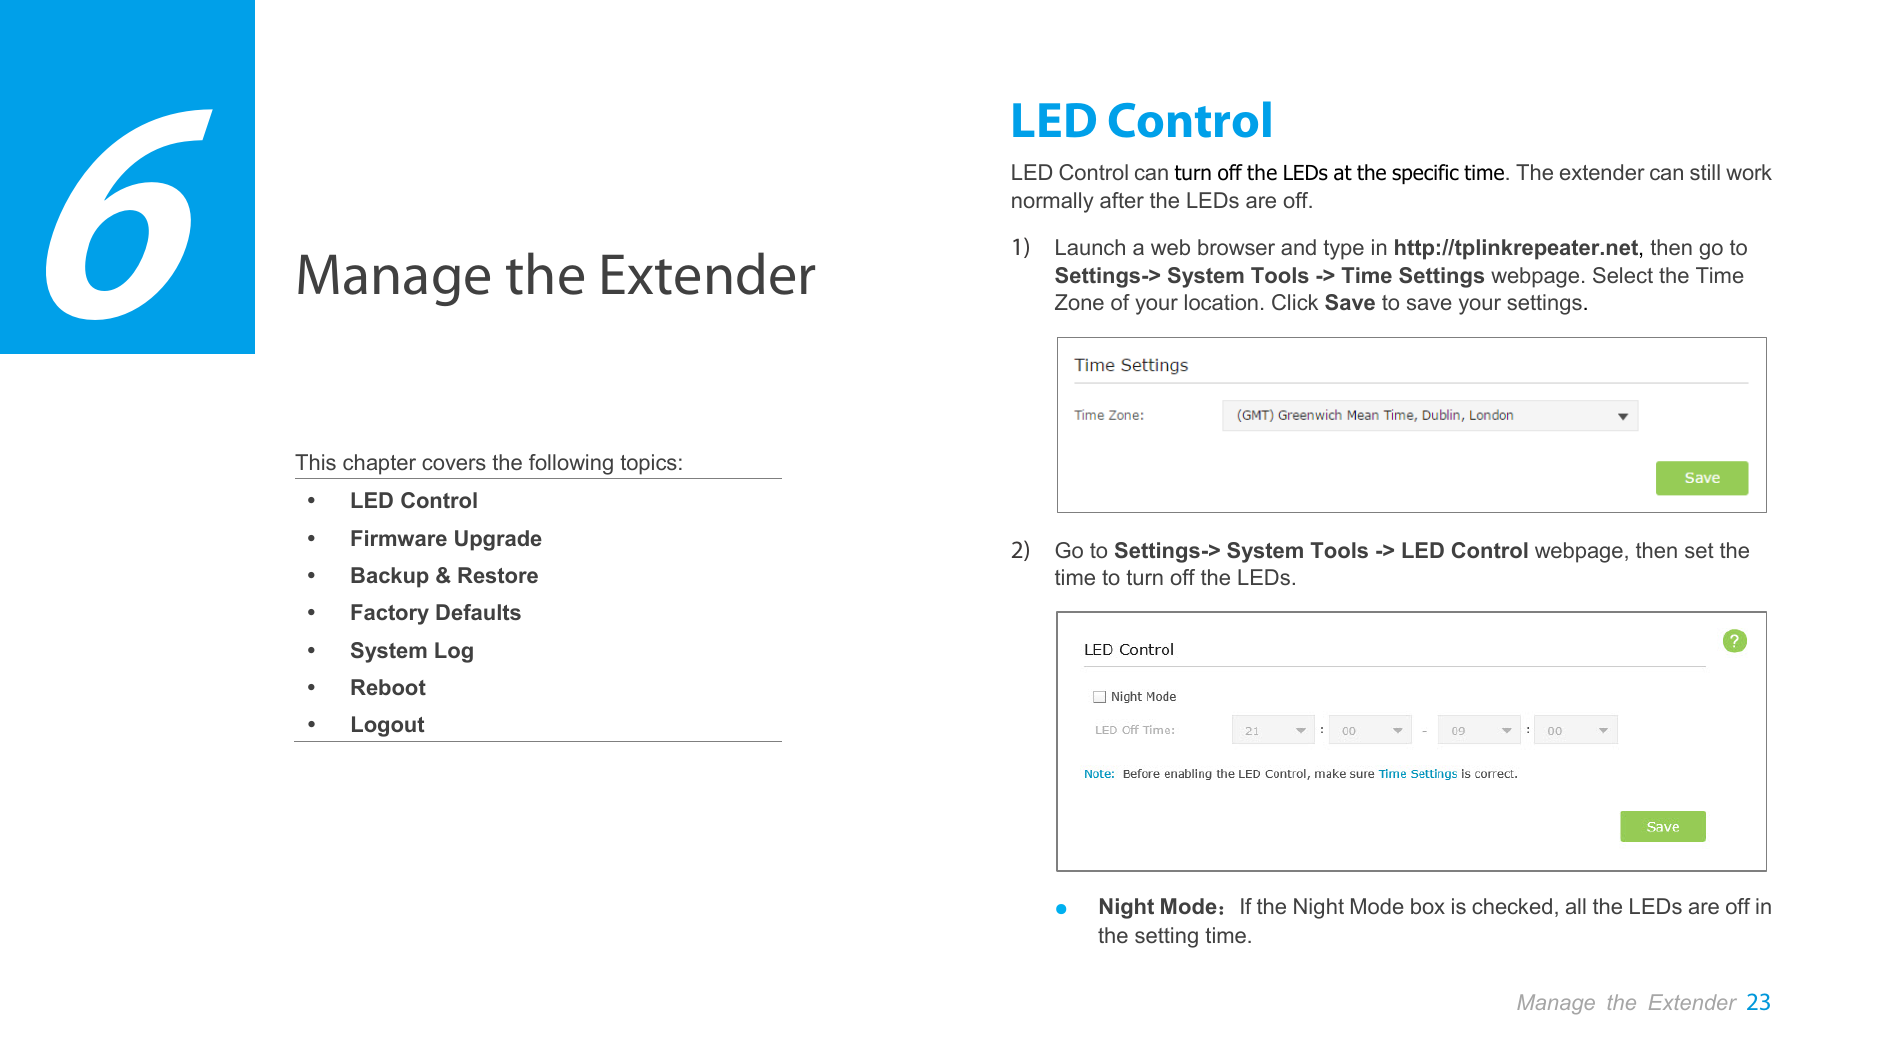  Manage the Extender    This chapter covers the following topics:  LED Control  Firmware Upgrade  Backup &amp; Restore  Factory Defaults  System Log  Reboot  Logout LED Control LED Control can turn off the LEDs at the specific time. The extender can still work normally after the LEDs are off.   1) Launch a web browser and type in http://tplinkrepeater.net, then go to Settings-&gt; System Tools -&gt; Time Settings webpage. Select the Time Zone of your location. Click Save to save your settings.  2) Go to Settings-&gt; System Tools -&gt; LED Control webpage, then set the time to turn off the LEDs.  ● Night Mode：If the Night Mode box is checked, all the LEDs are off in the setting time. 6 Manage the Extender 23  